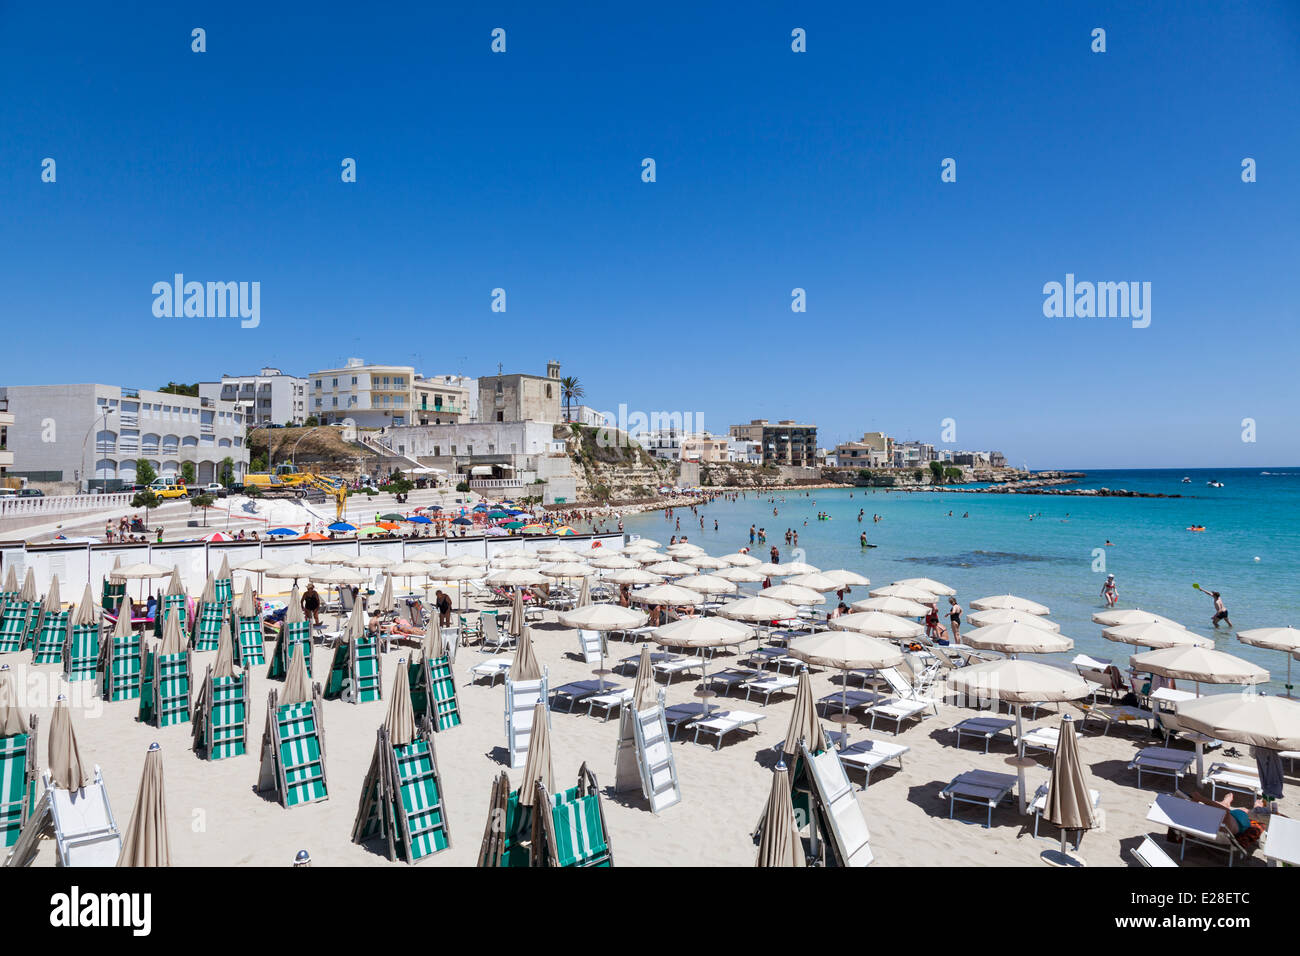 Beach parasols and sunloungers on a sunny beach in Otranto, Puglia, Salento region of southern Italy Stock Photo